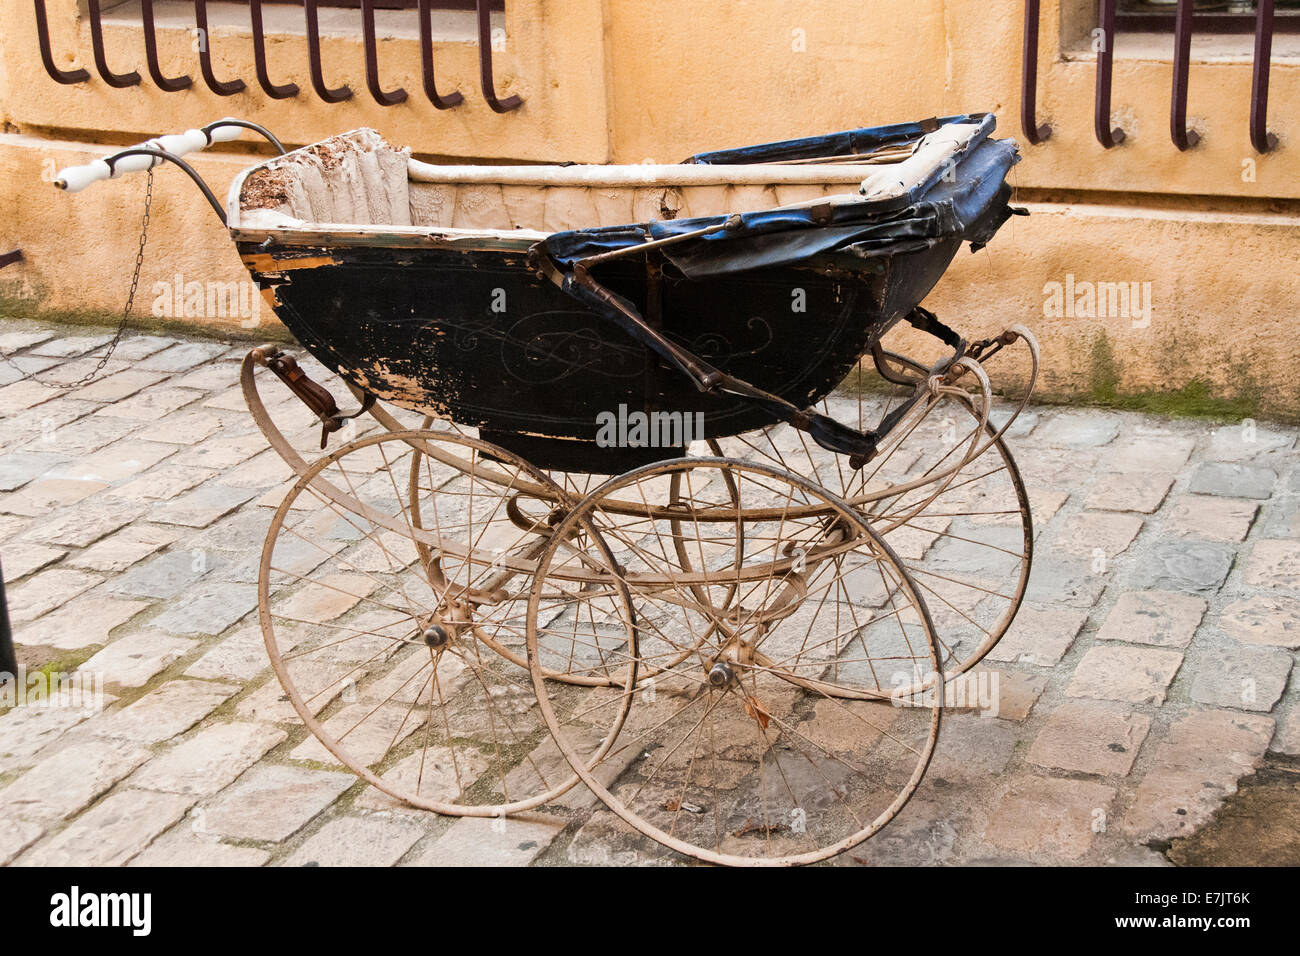 Old baby's pram seen outside an antique bric-a-brac shop in Aix en Provence, France. Stock Photo